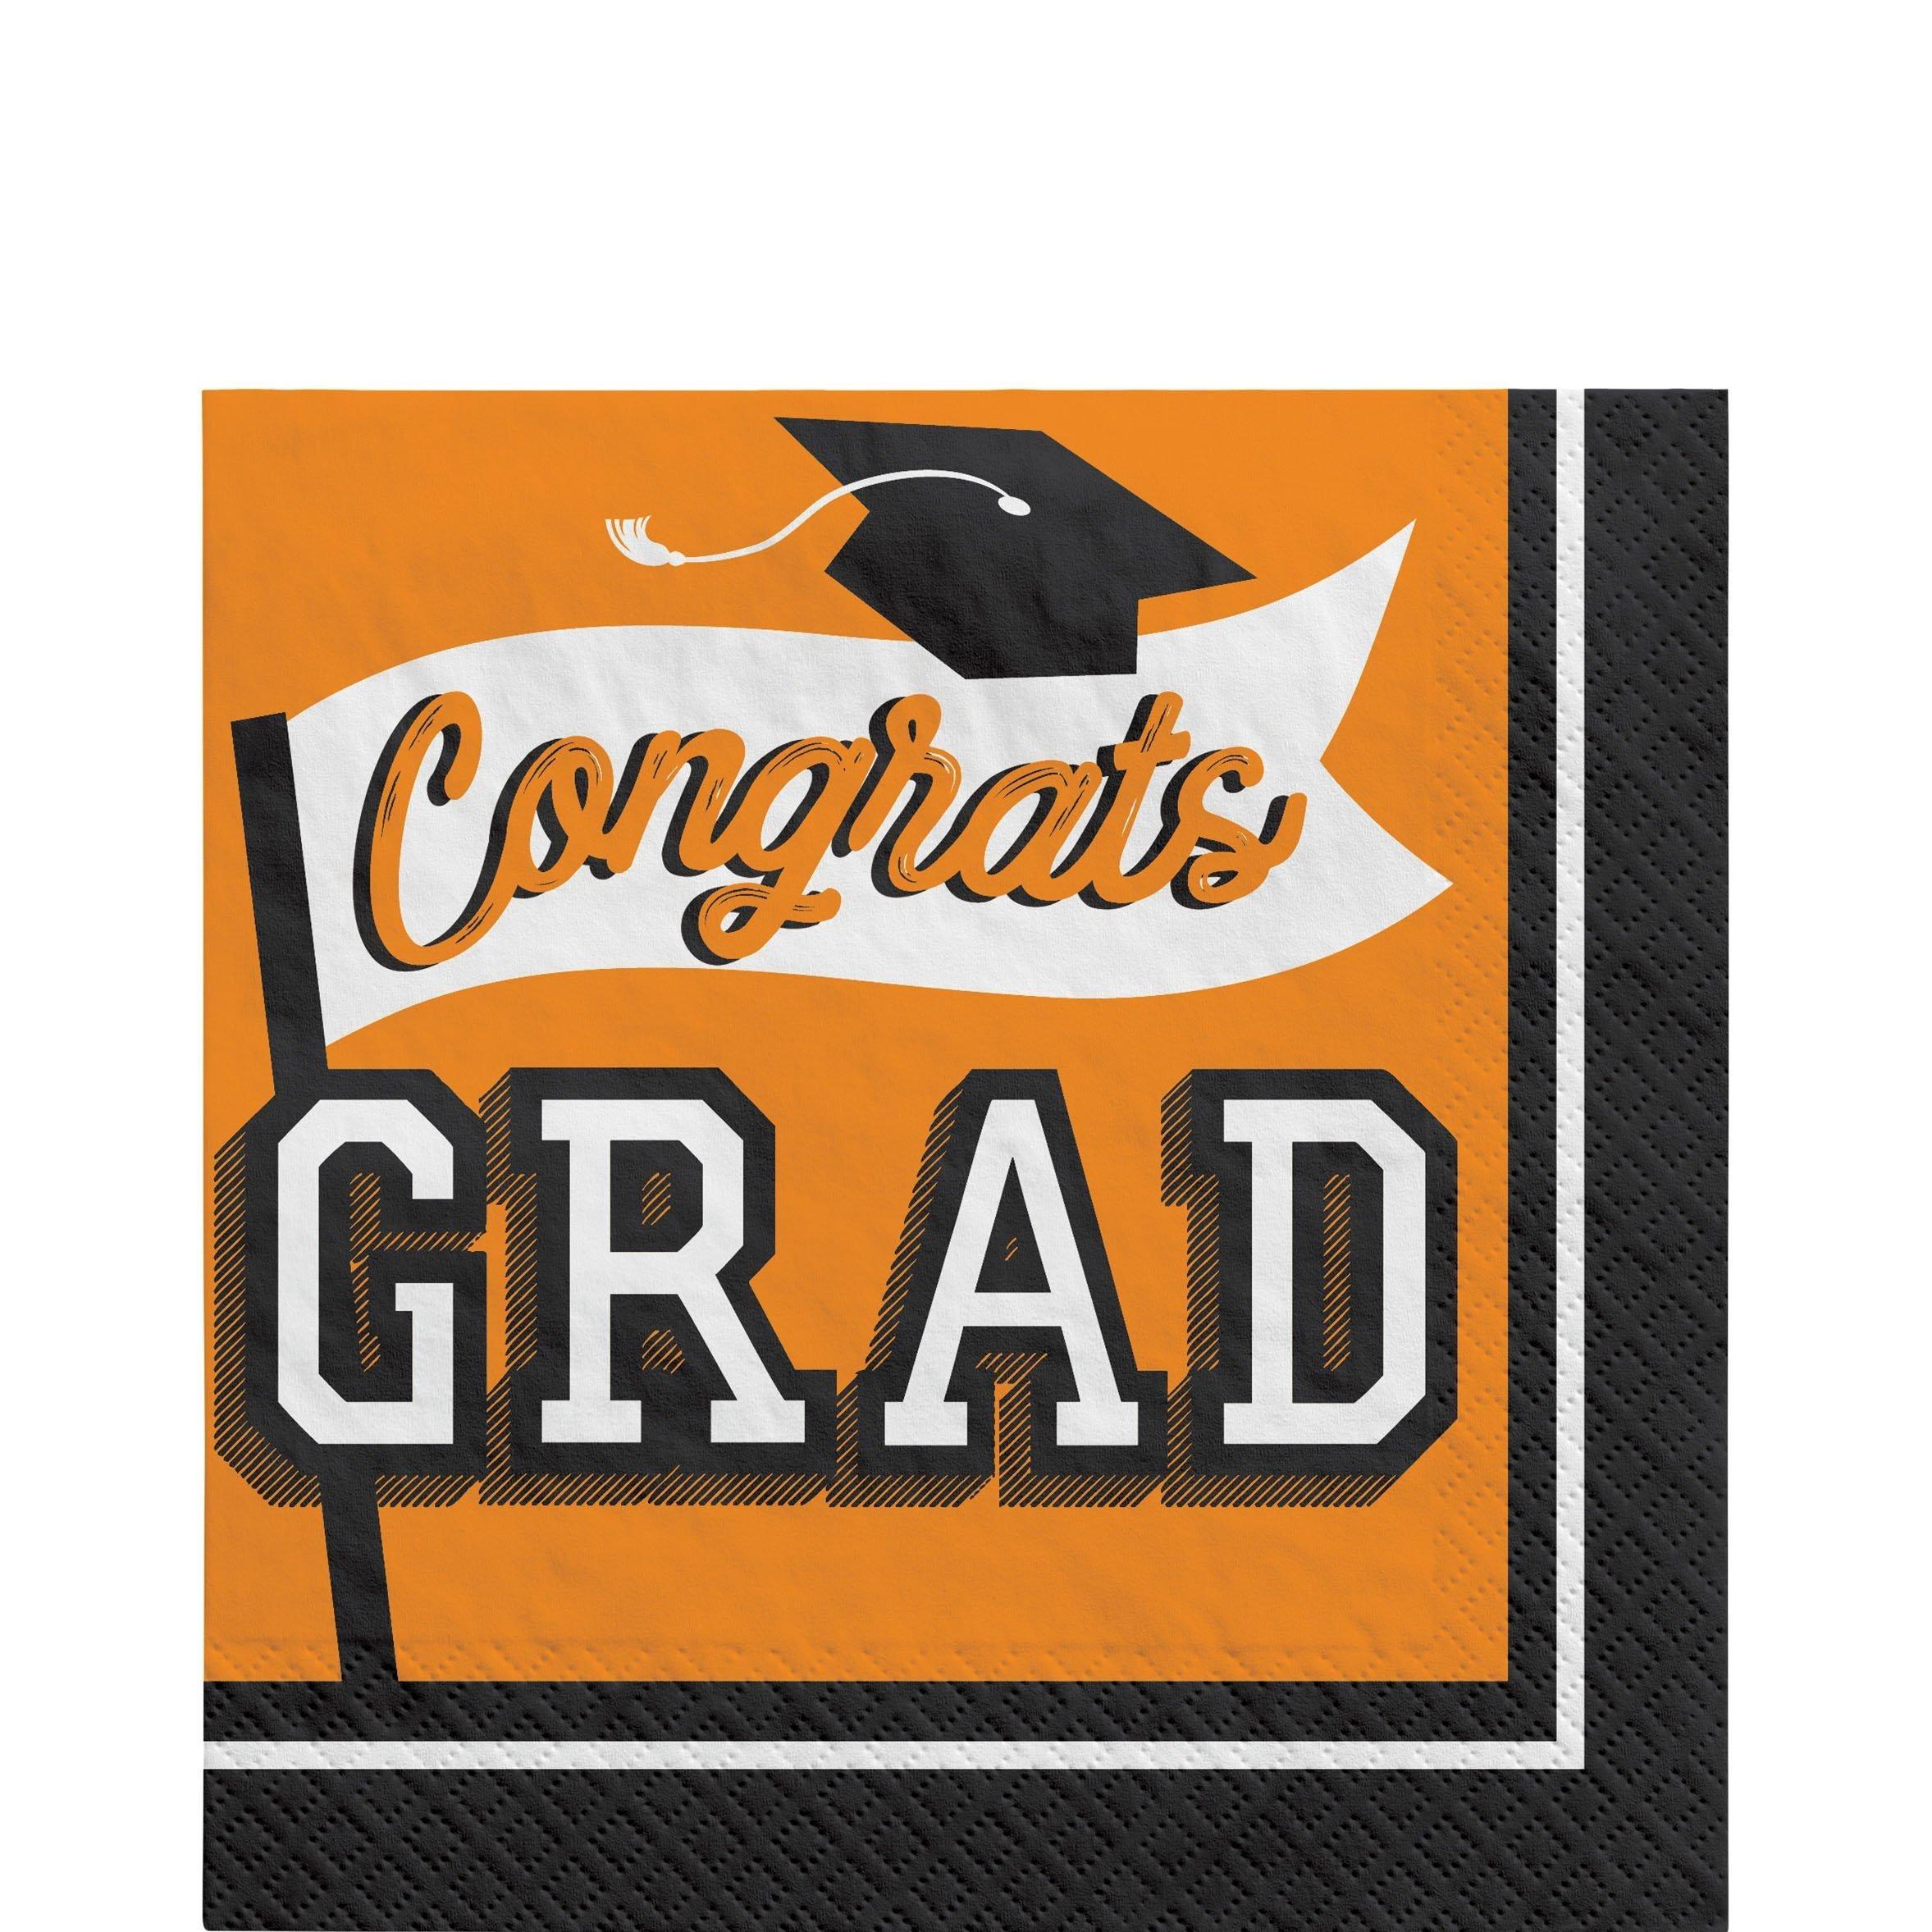 Graduation Party Supplies Kit for 60 with Decorations, Banners, Plates, Napkins, Cups - Orange Congrats Grad